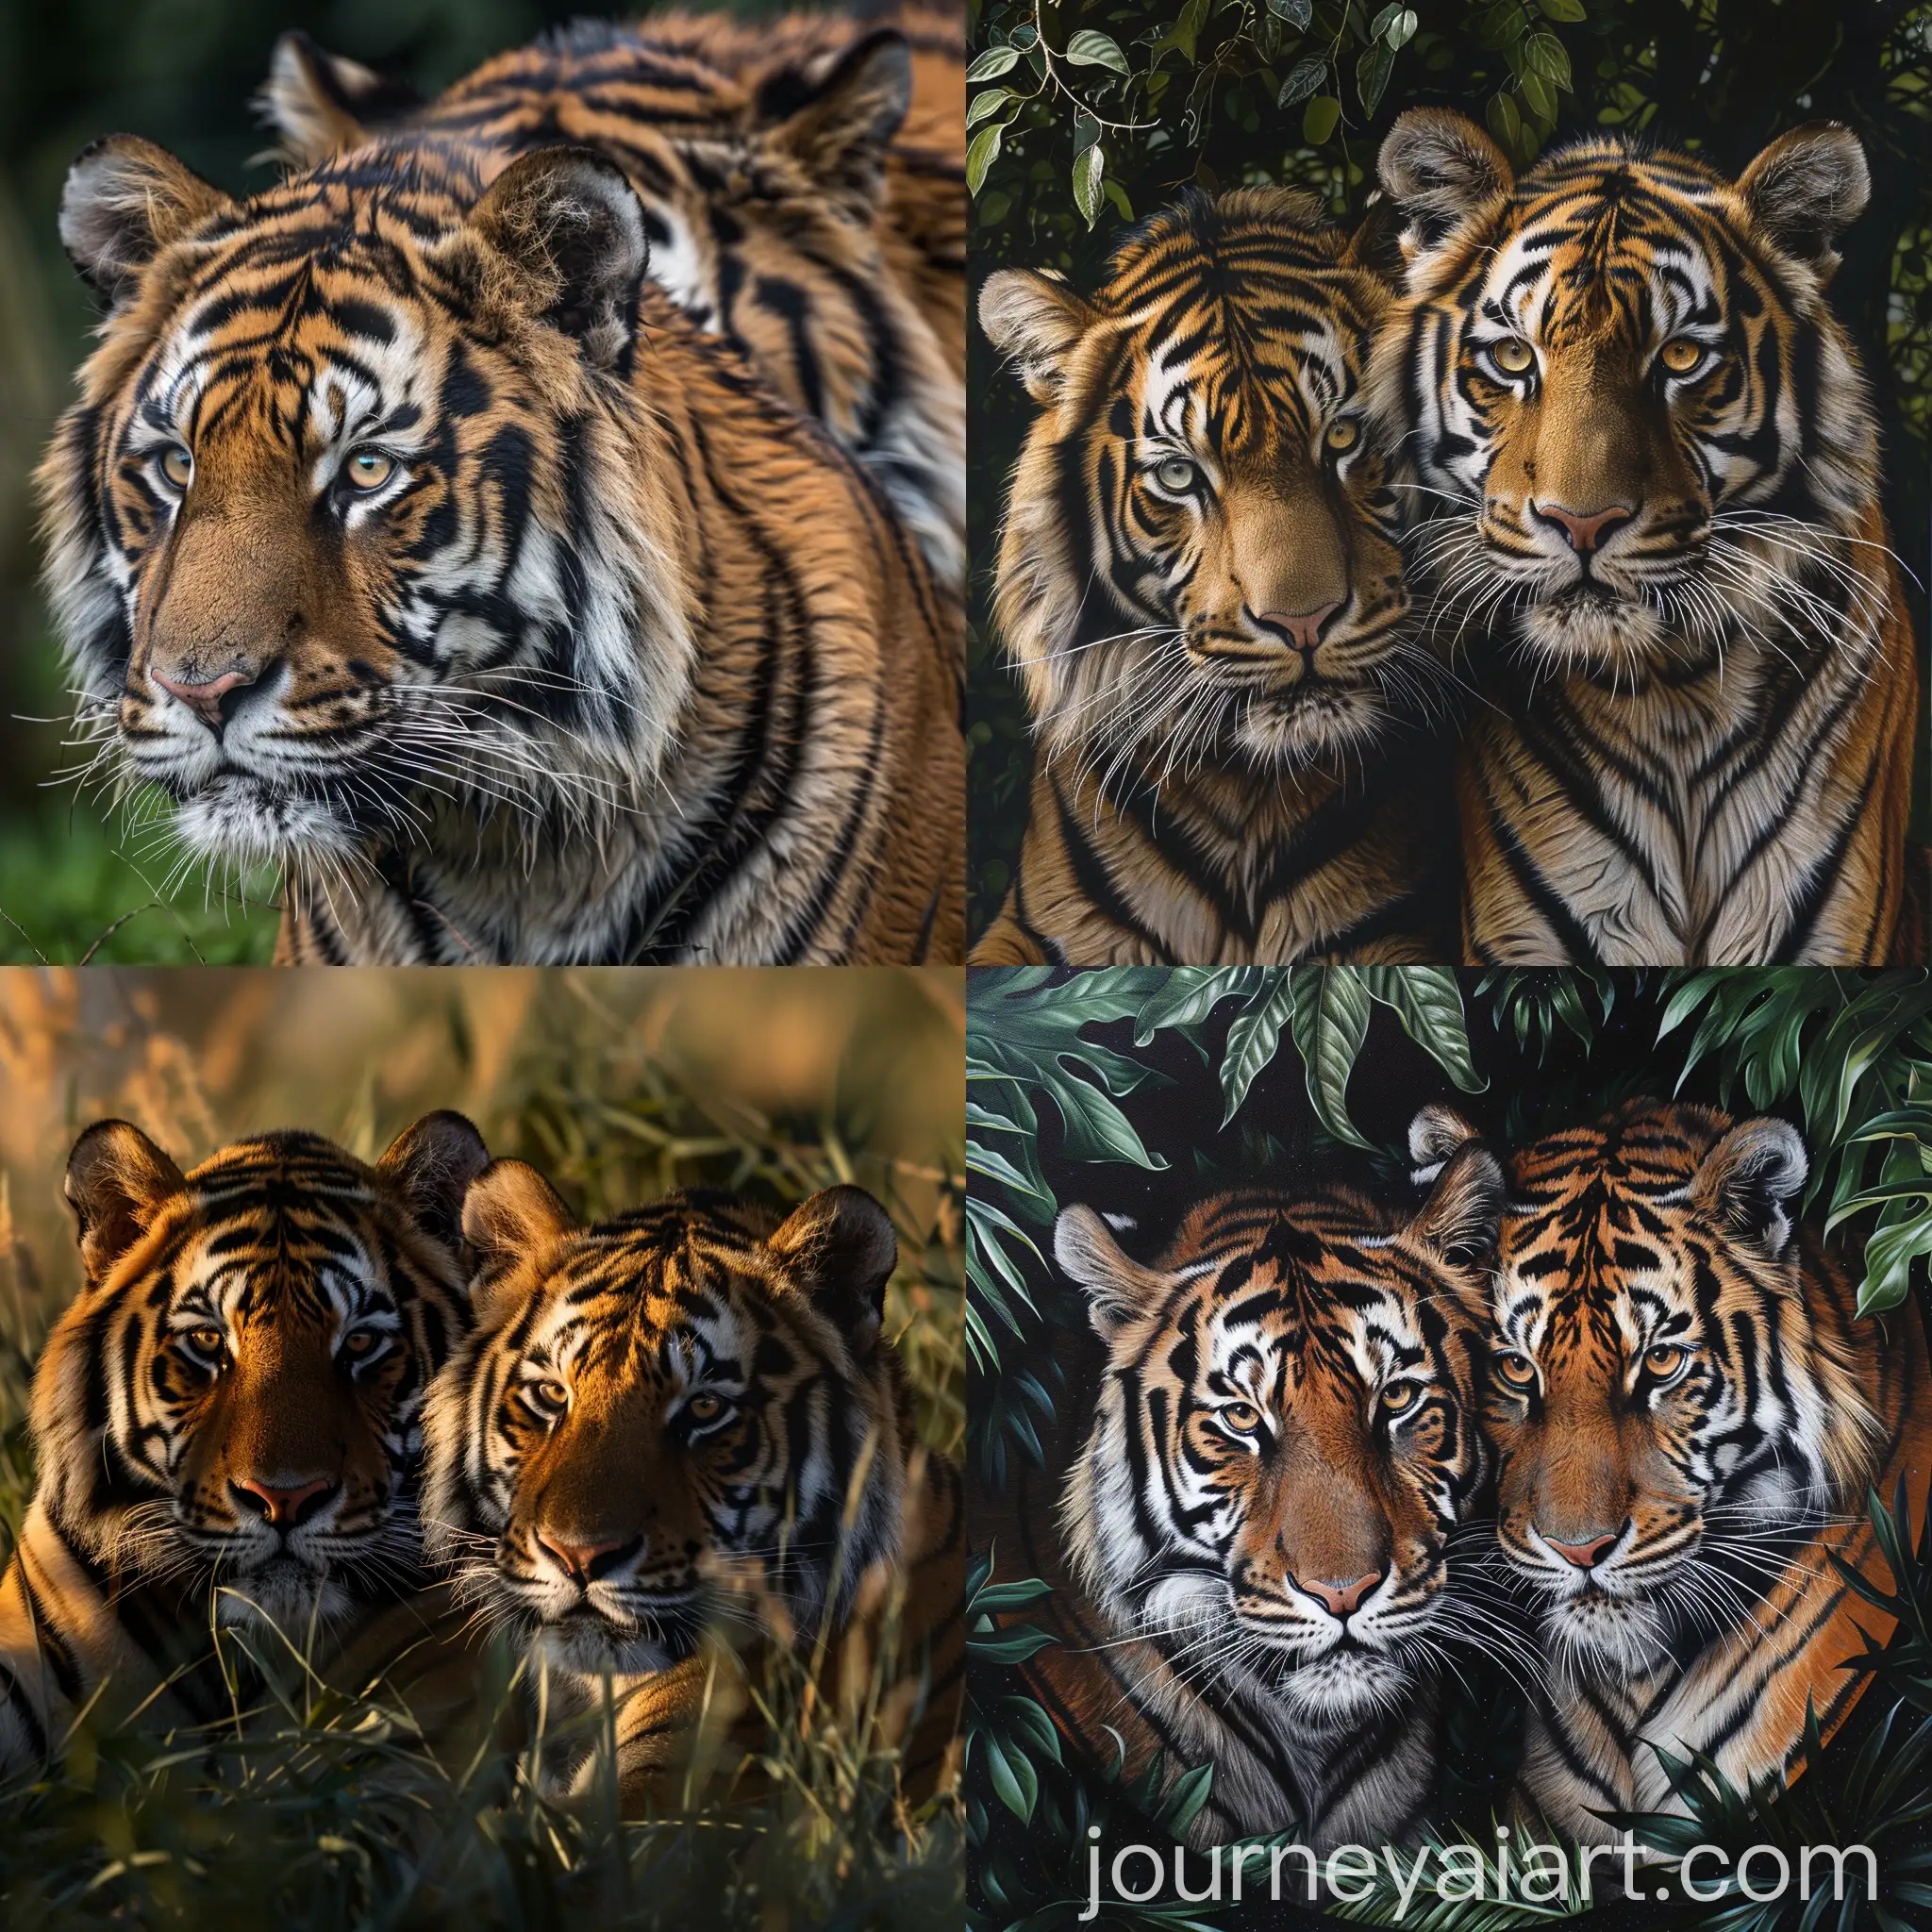 Majestic-Tigers-in-Vivid-Artistic-Style